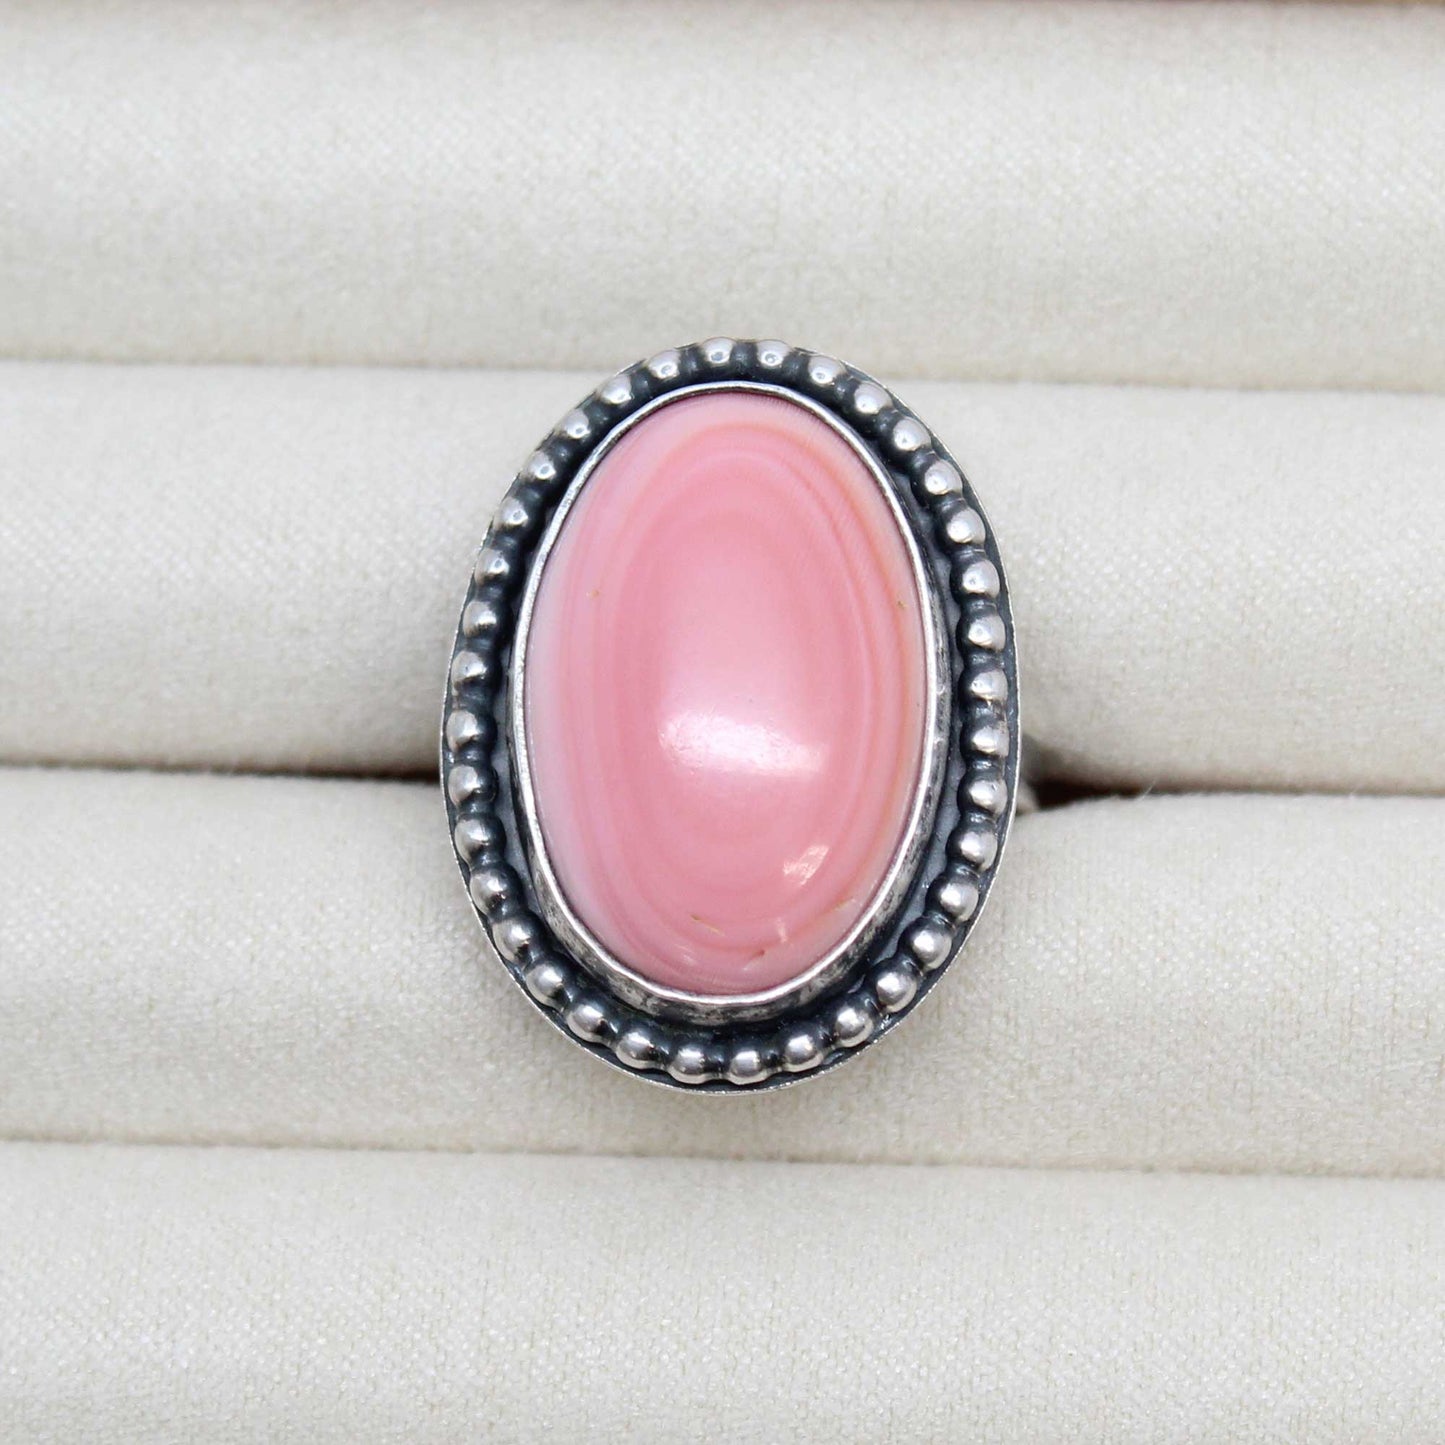 Pink Queen Conch Ring Sterling Silver Size 8 US